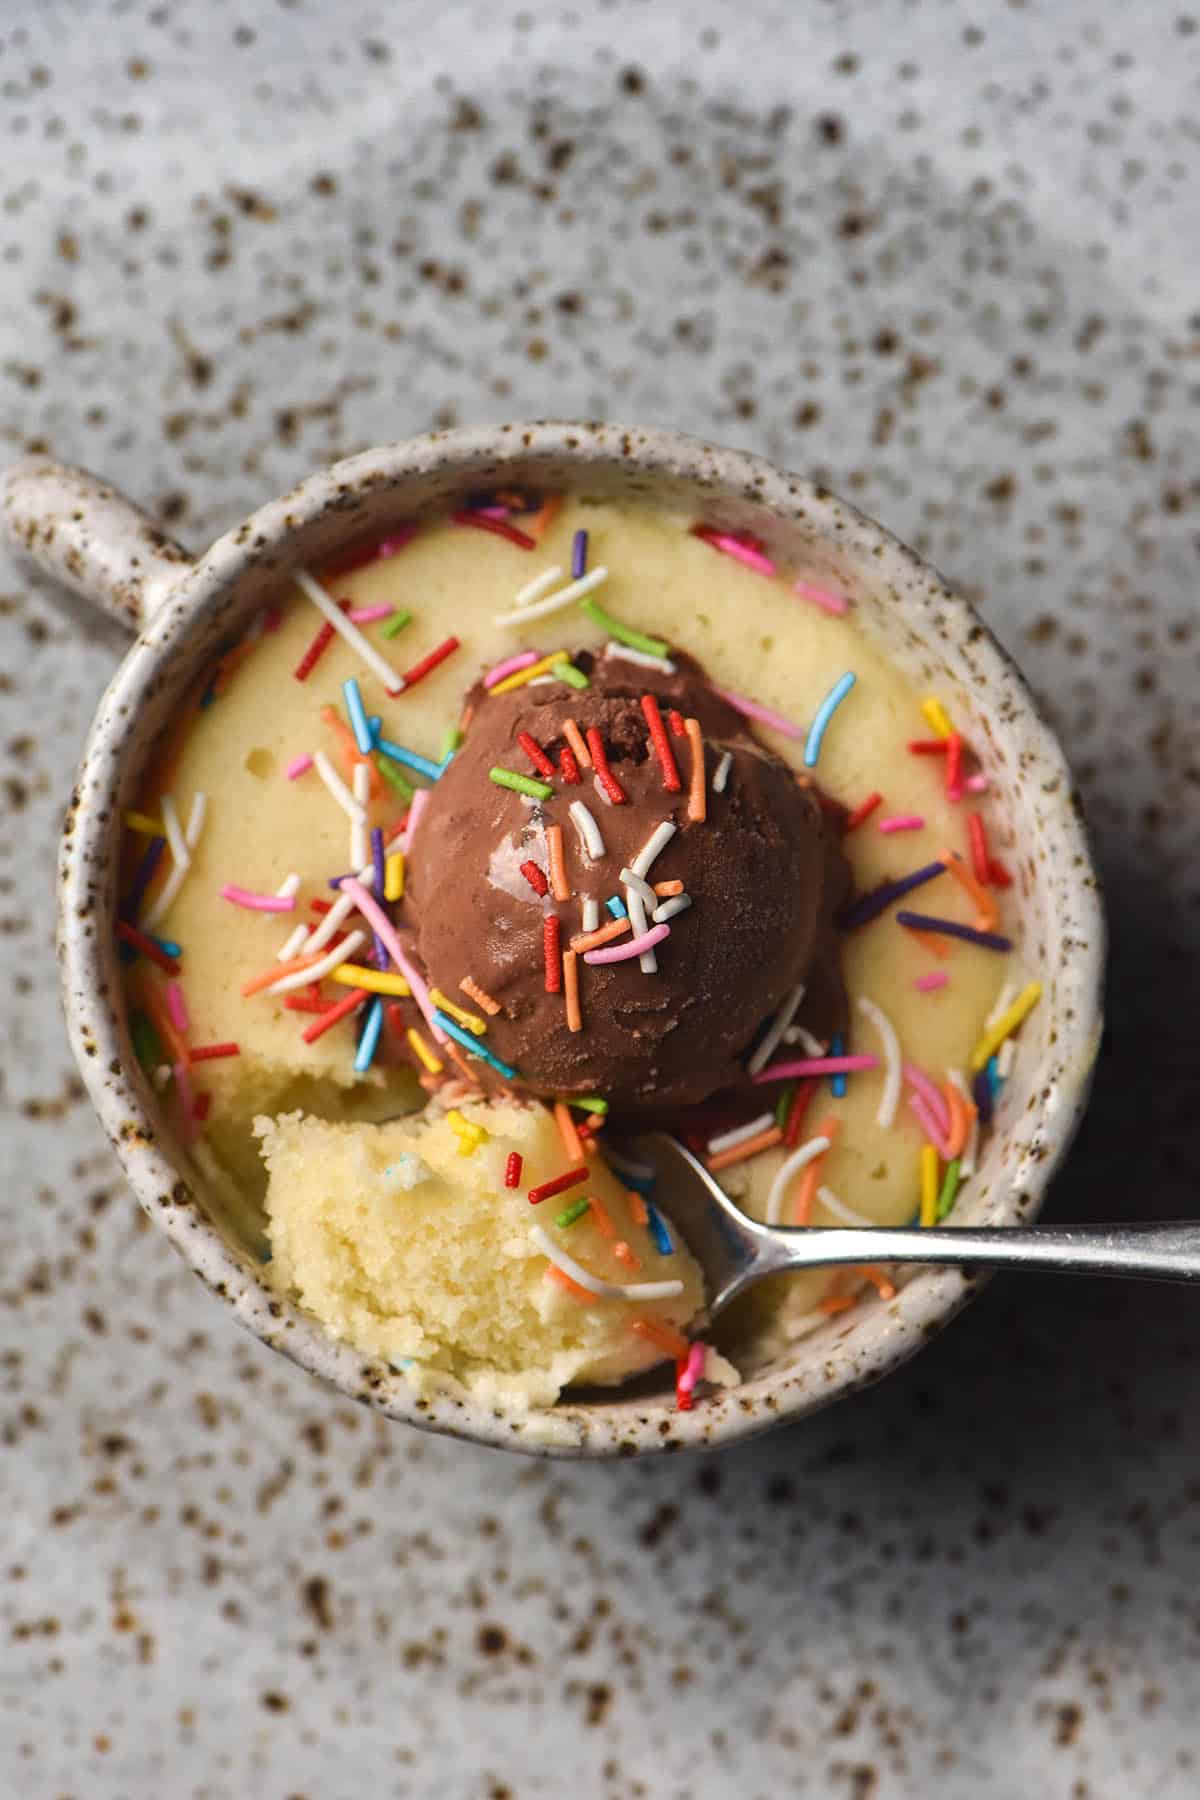 An aerial image of a gluten free mug cake in a white speckled ceramic mug on a white speckled ceramic plate. The mug cake is topped with melting chocolate ice cream and rainbow sprinkles, and a spoon extends out of the mug to the right of the image.